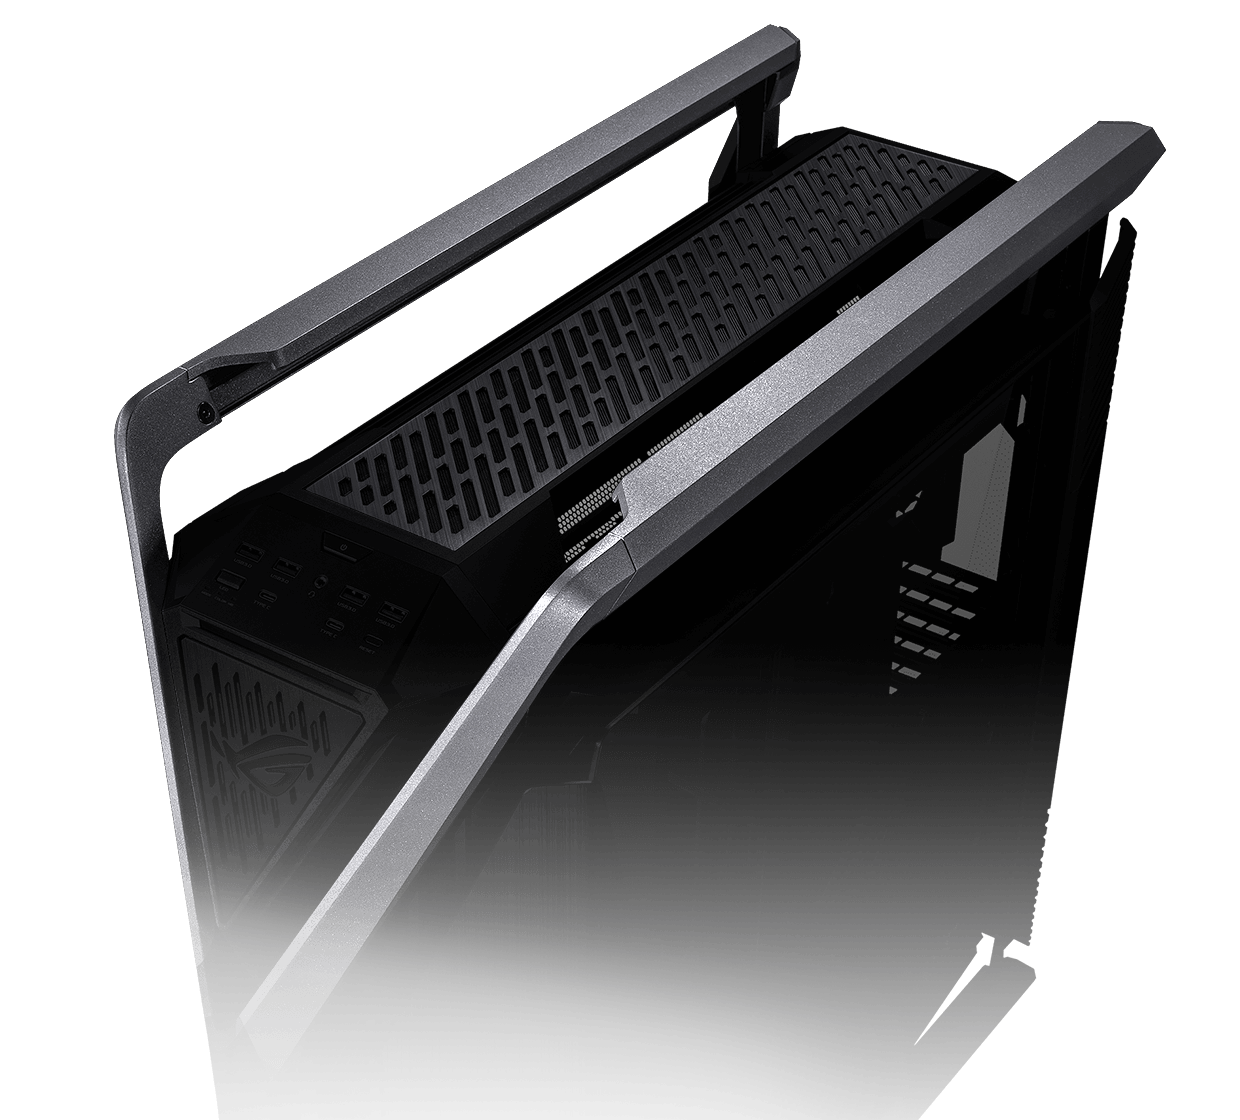 ASUS ROG Hyperion GR701 PC Gaming Case Review - OC3D